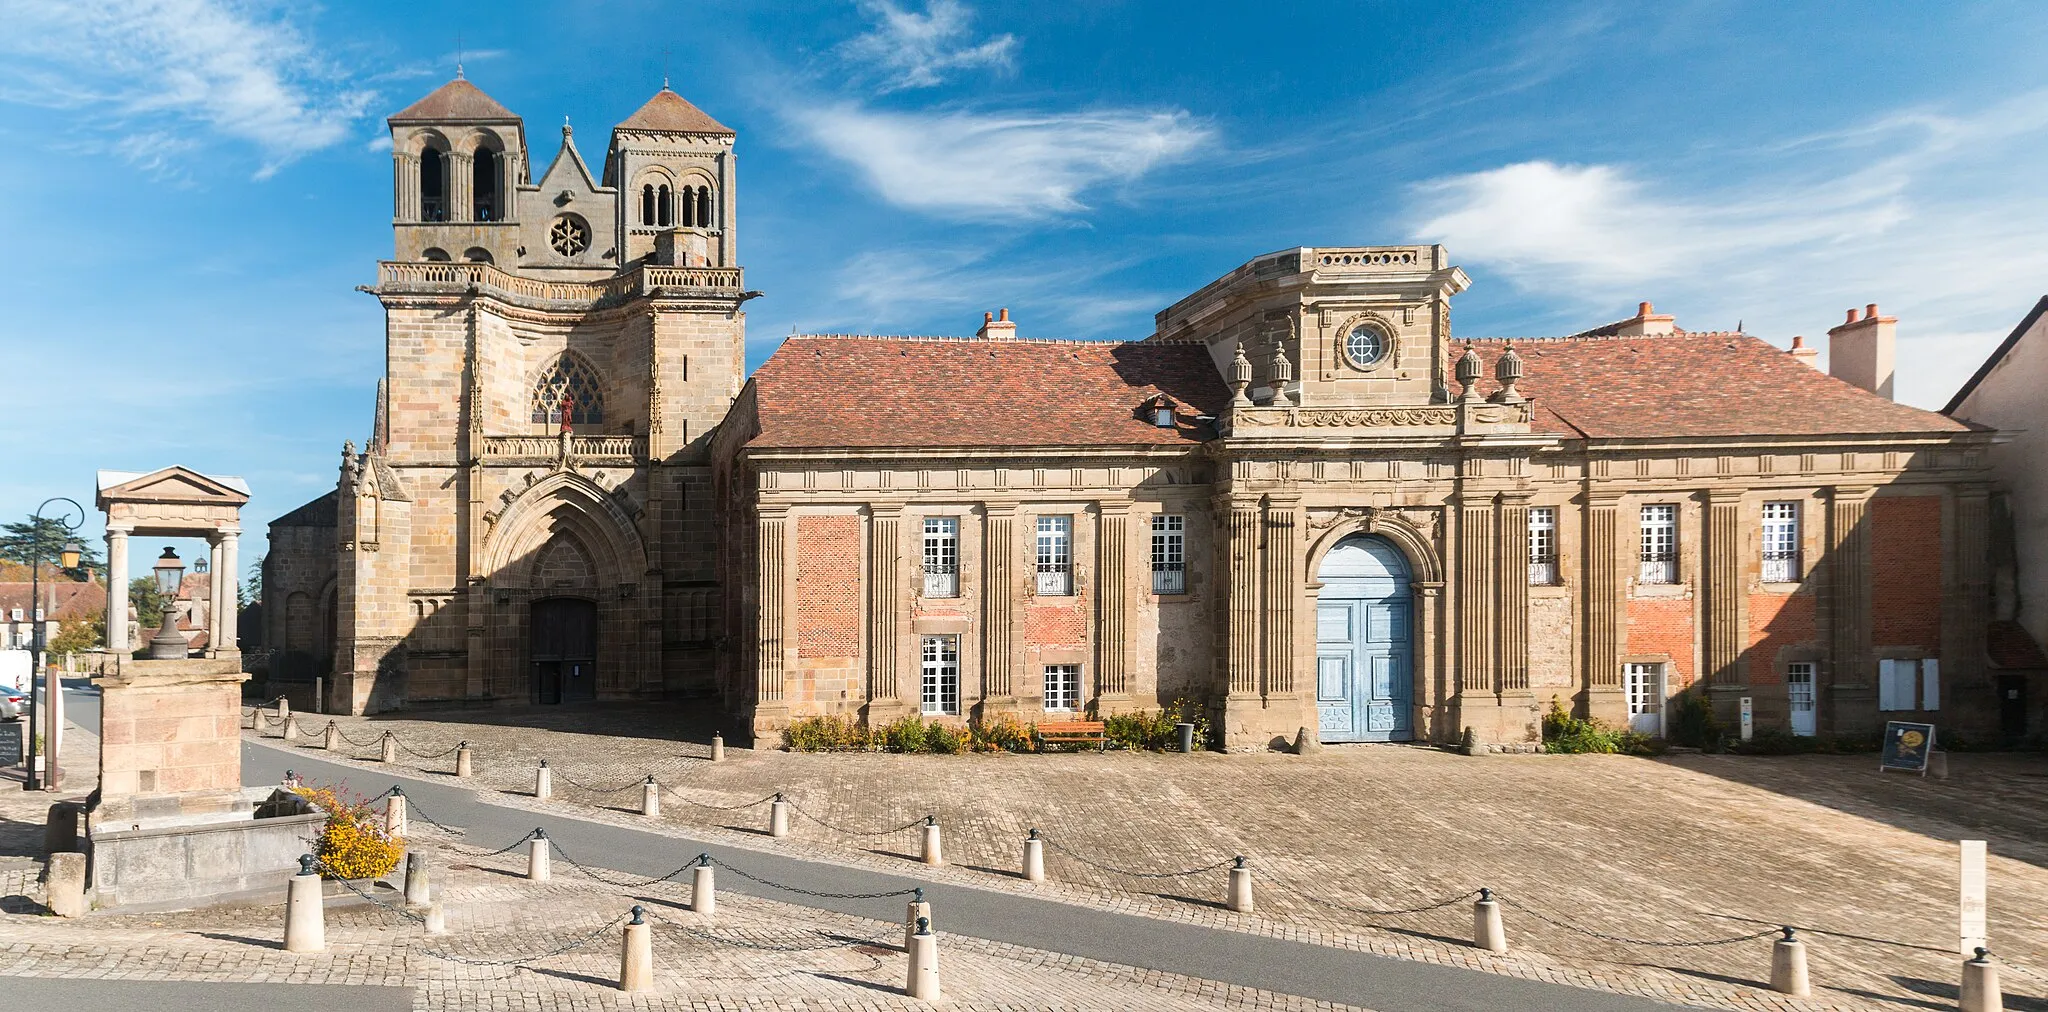 Photo showing: The imposing monastery building, built in the 17th century, before the Romanesque church of which emerge the two towers.